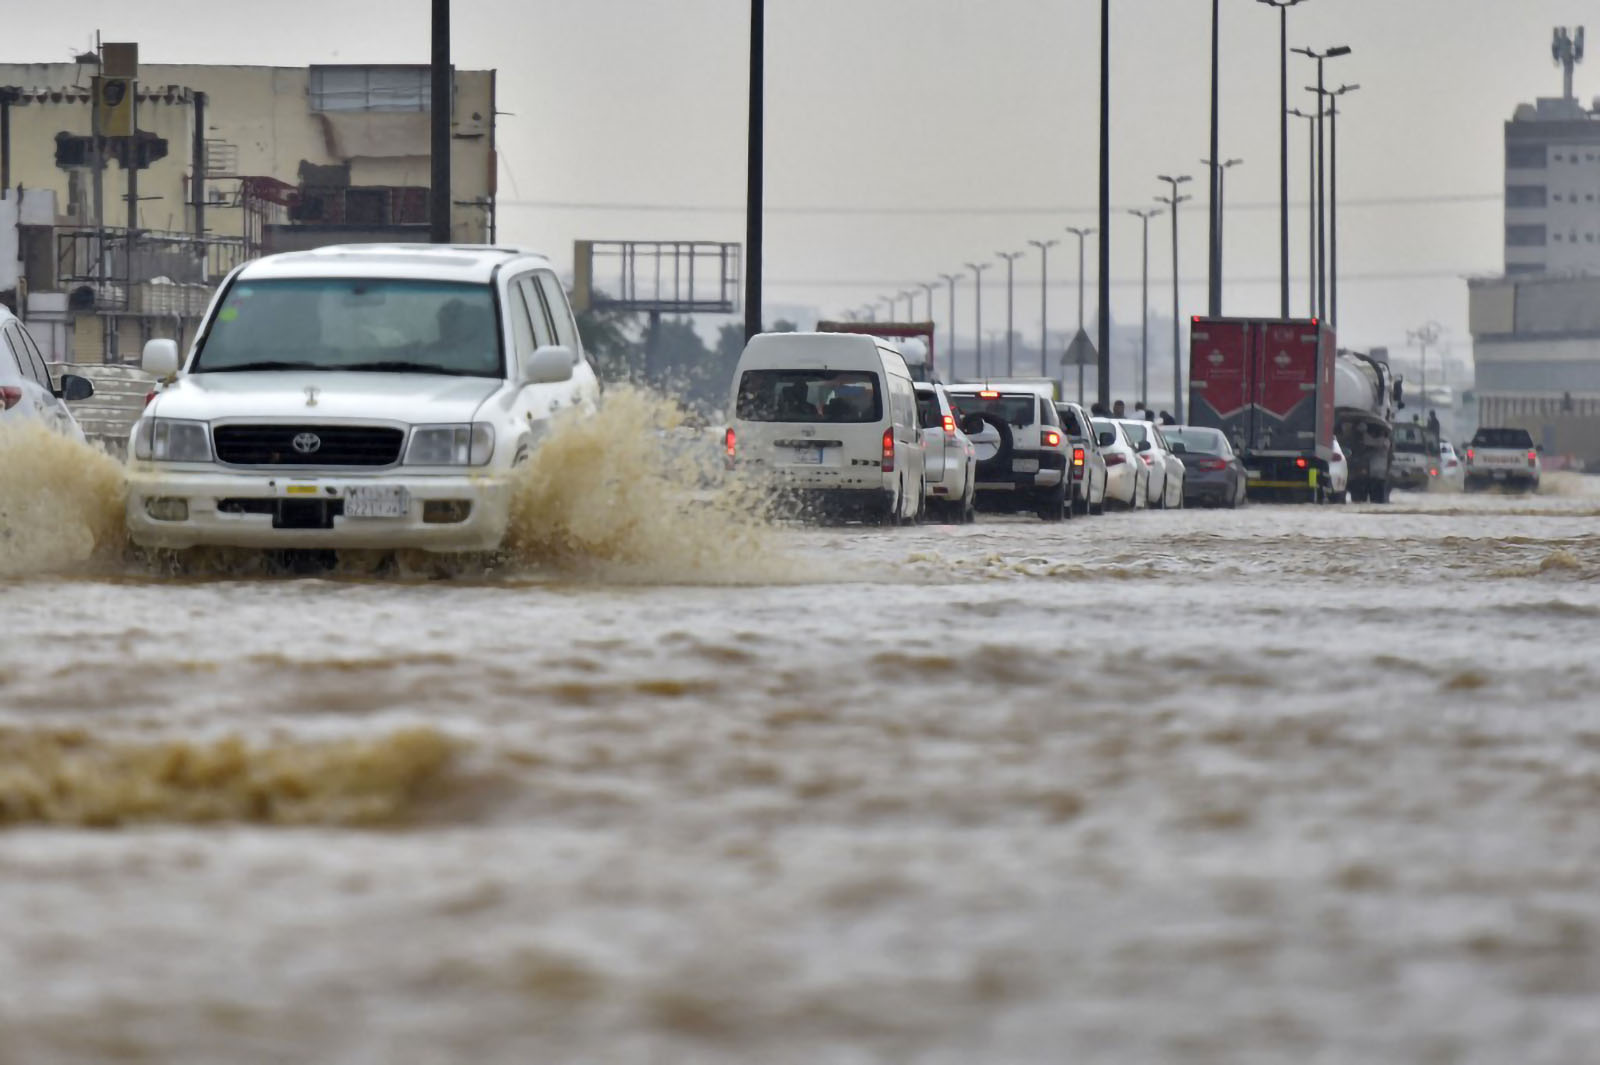 Cars drive through a flooded street following heavy rains in the Saudi coastal city of Jeddah on November 24, 2022, which delayed flights, forced school suspensions and closed the road to Mecca, Islam's holiest city. Jeddah, a city of roughly four million people positioned on the Red Sea, is often referred to as the "gateway to Mecca", where millions perform the hajj and umrah pilgrimages each year. Winter rainstorms and flooding occur almost every year in Jeddah, where residents have long decried poor infrastructure. (Photo by Amer HILABI / AFP)